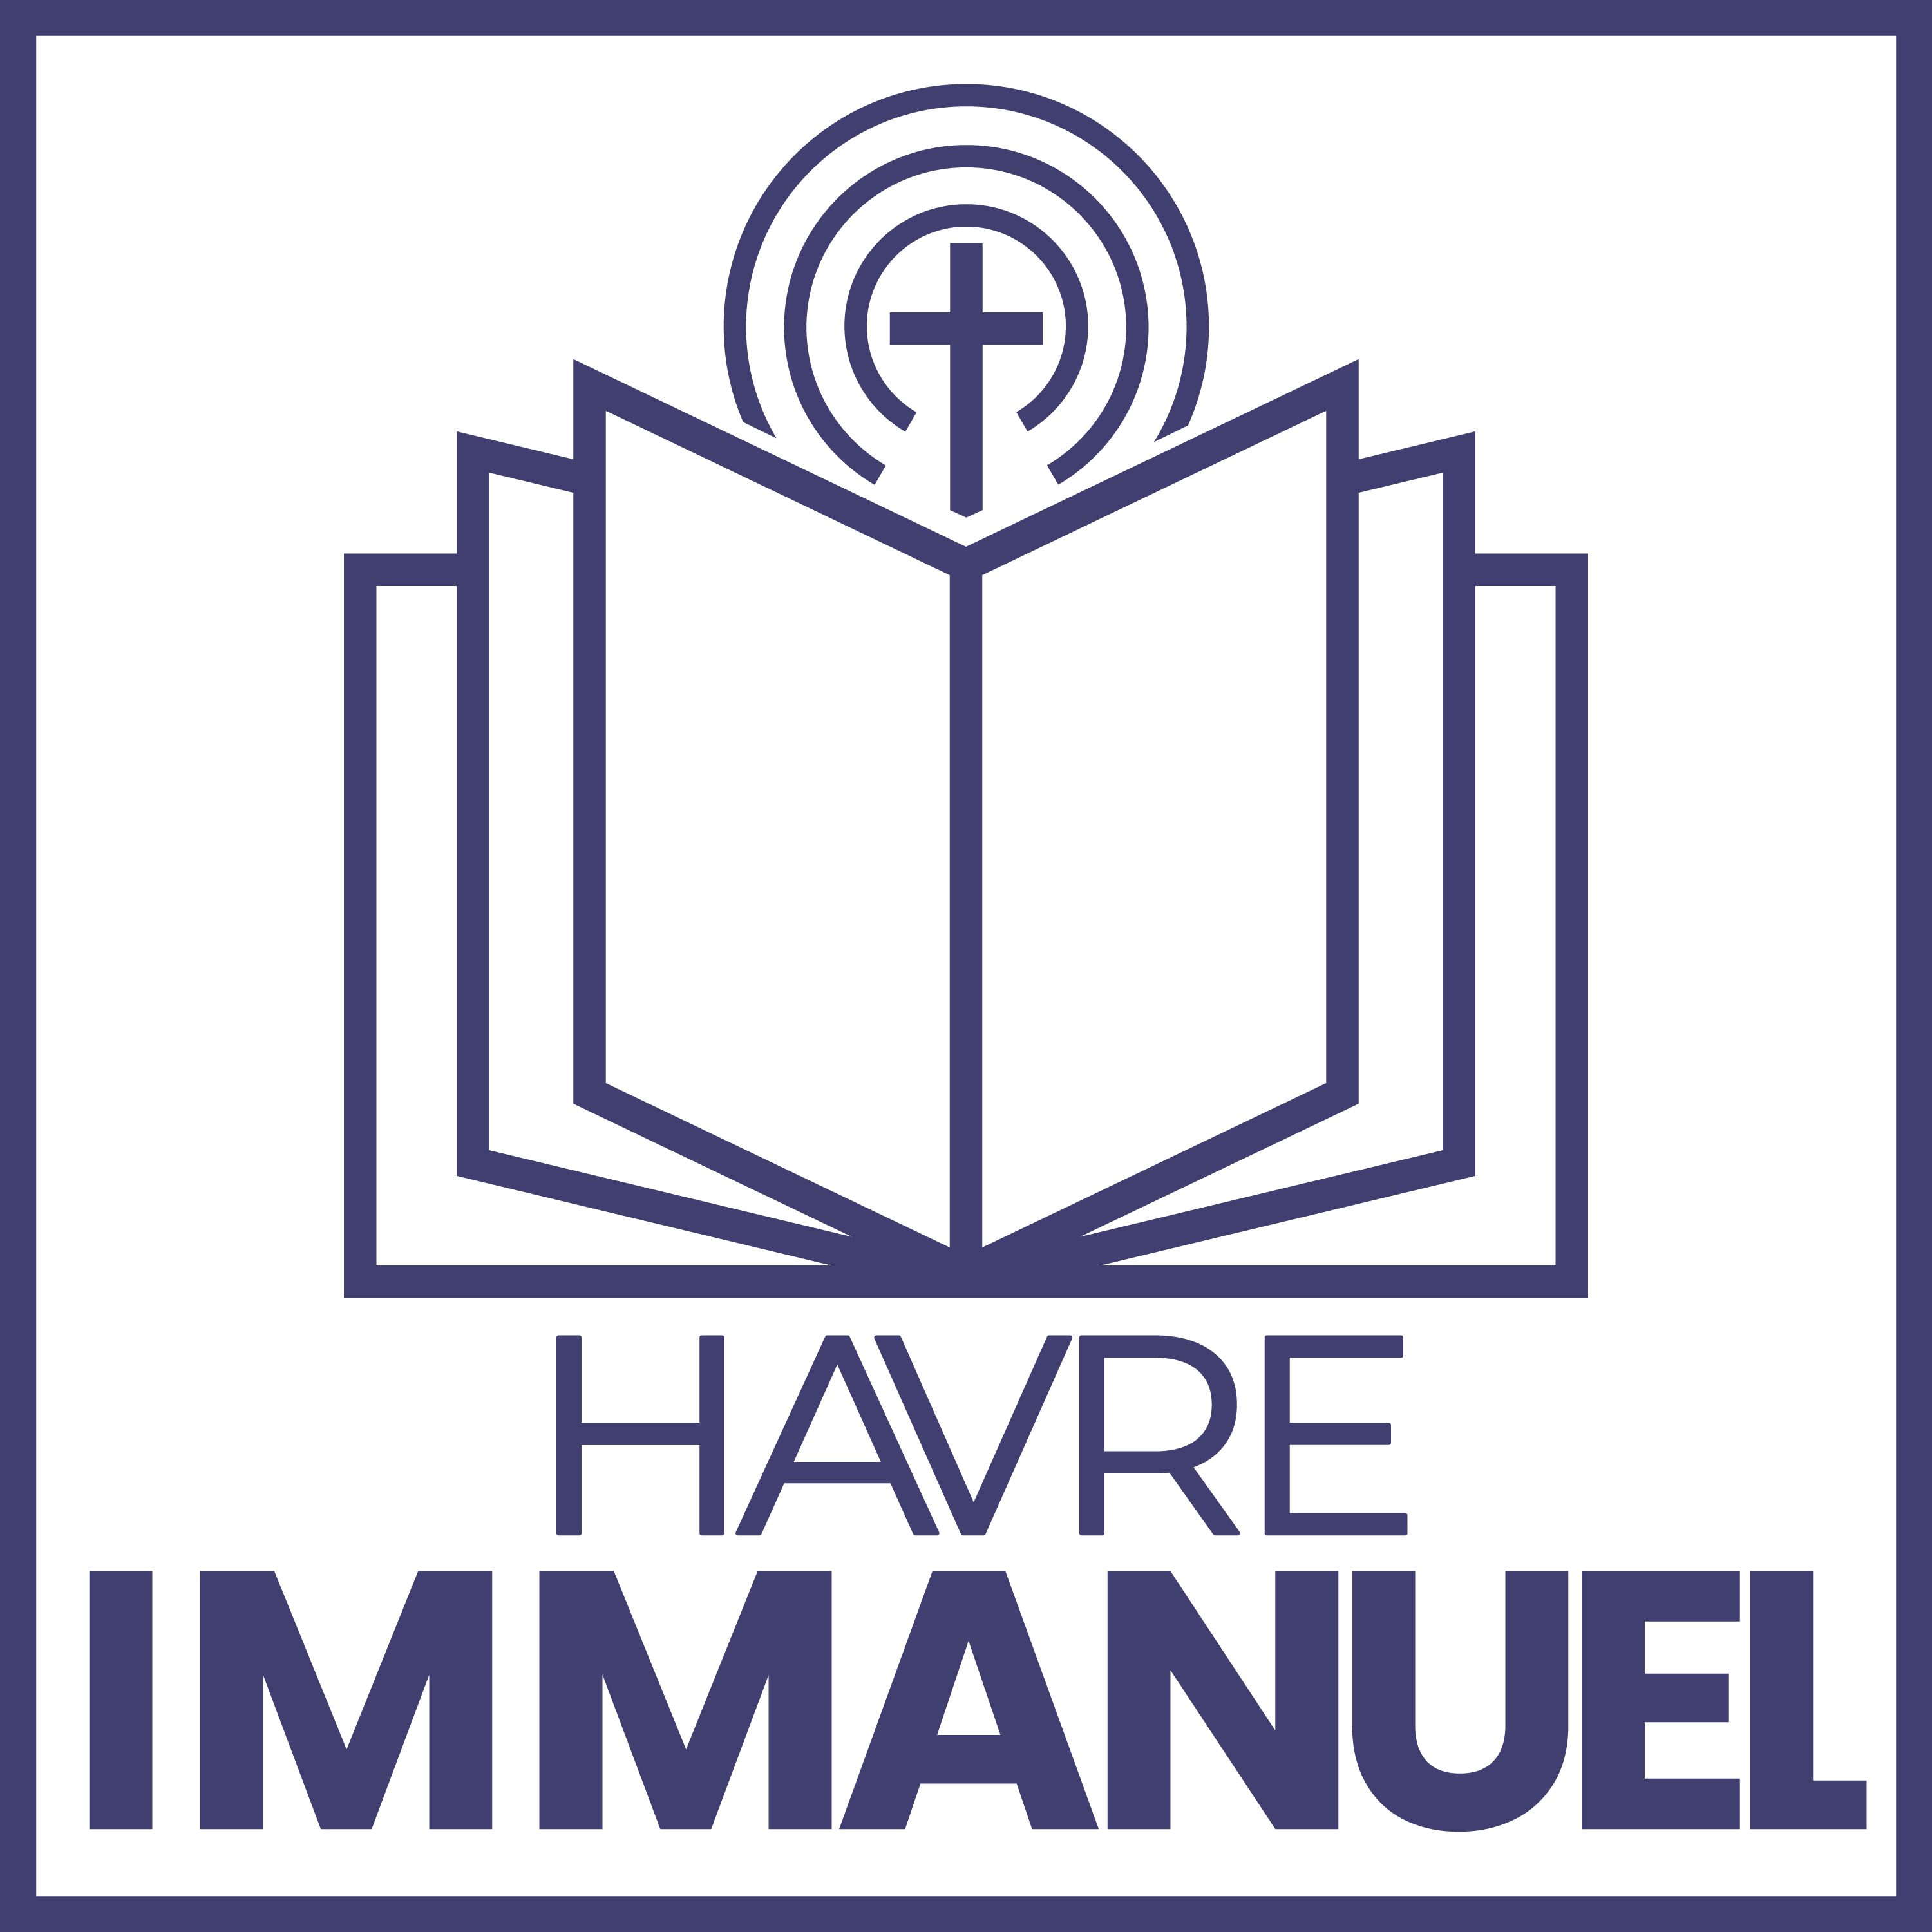 Havre Immanuel Podcast Logo: A Bible lays open beneath a cross. Radio waves emanate from the cross. Words beneath read, Havre Immanuel.